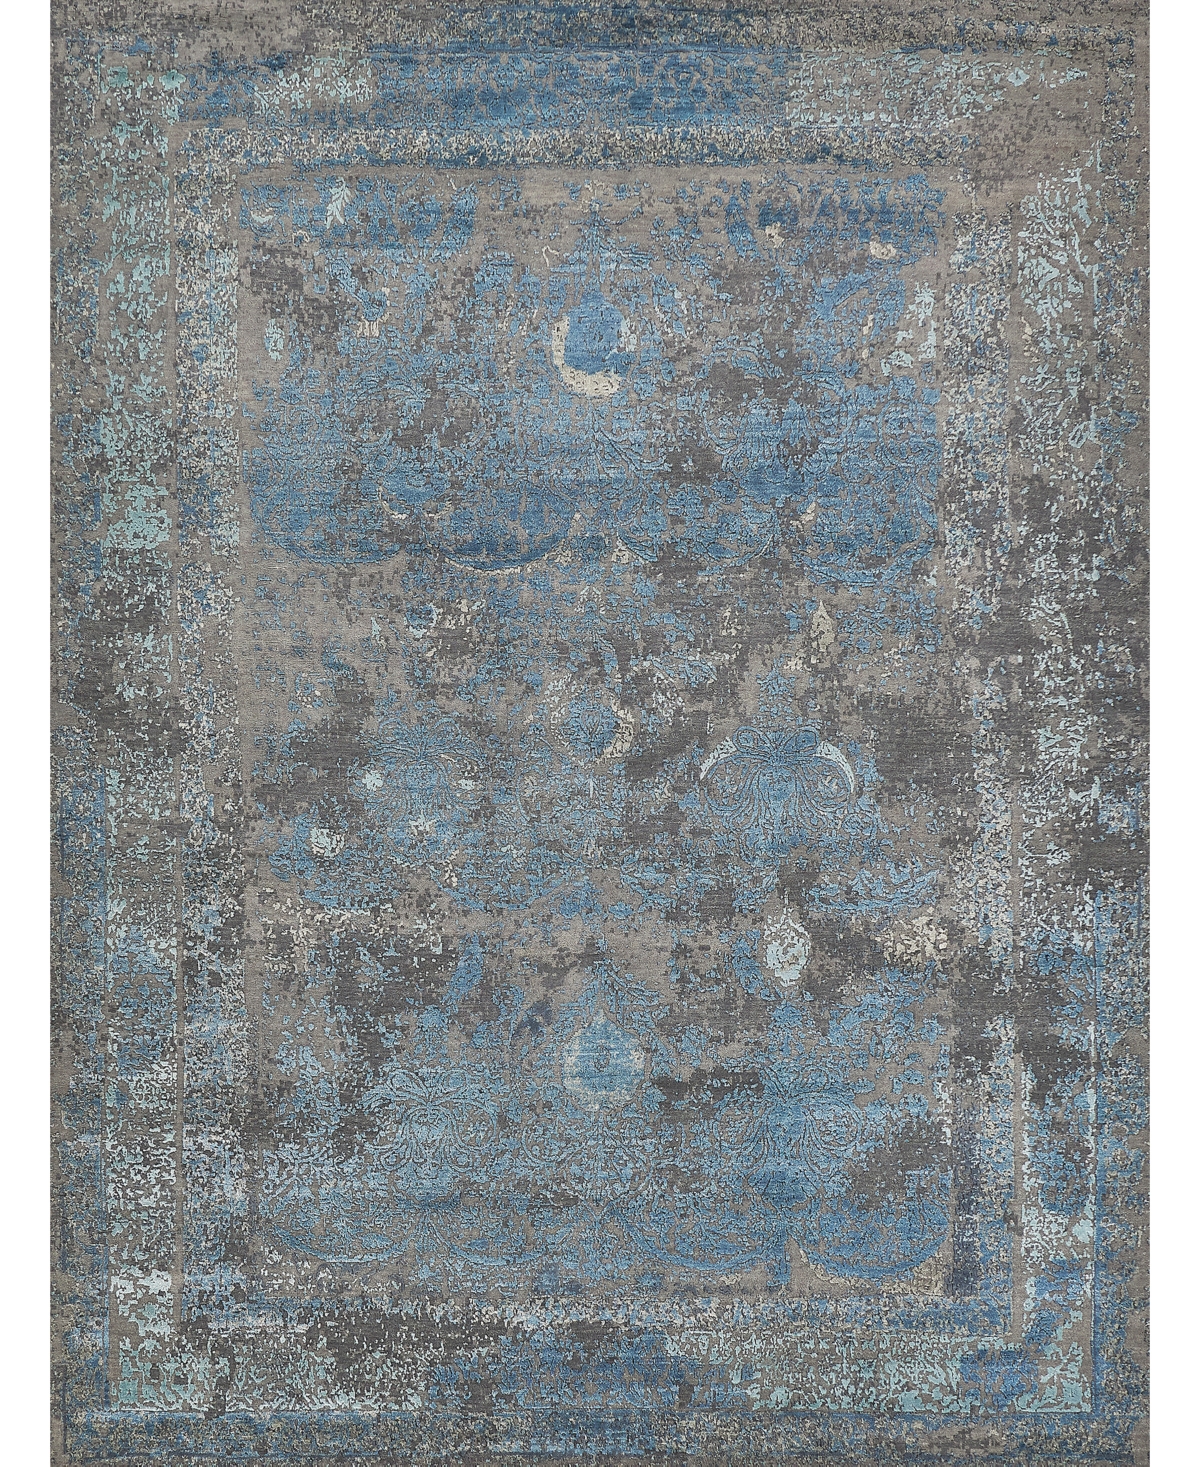 Exquisite Rugs Maison ER2470 8' x 10' Area Rug - Silver Tone